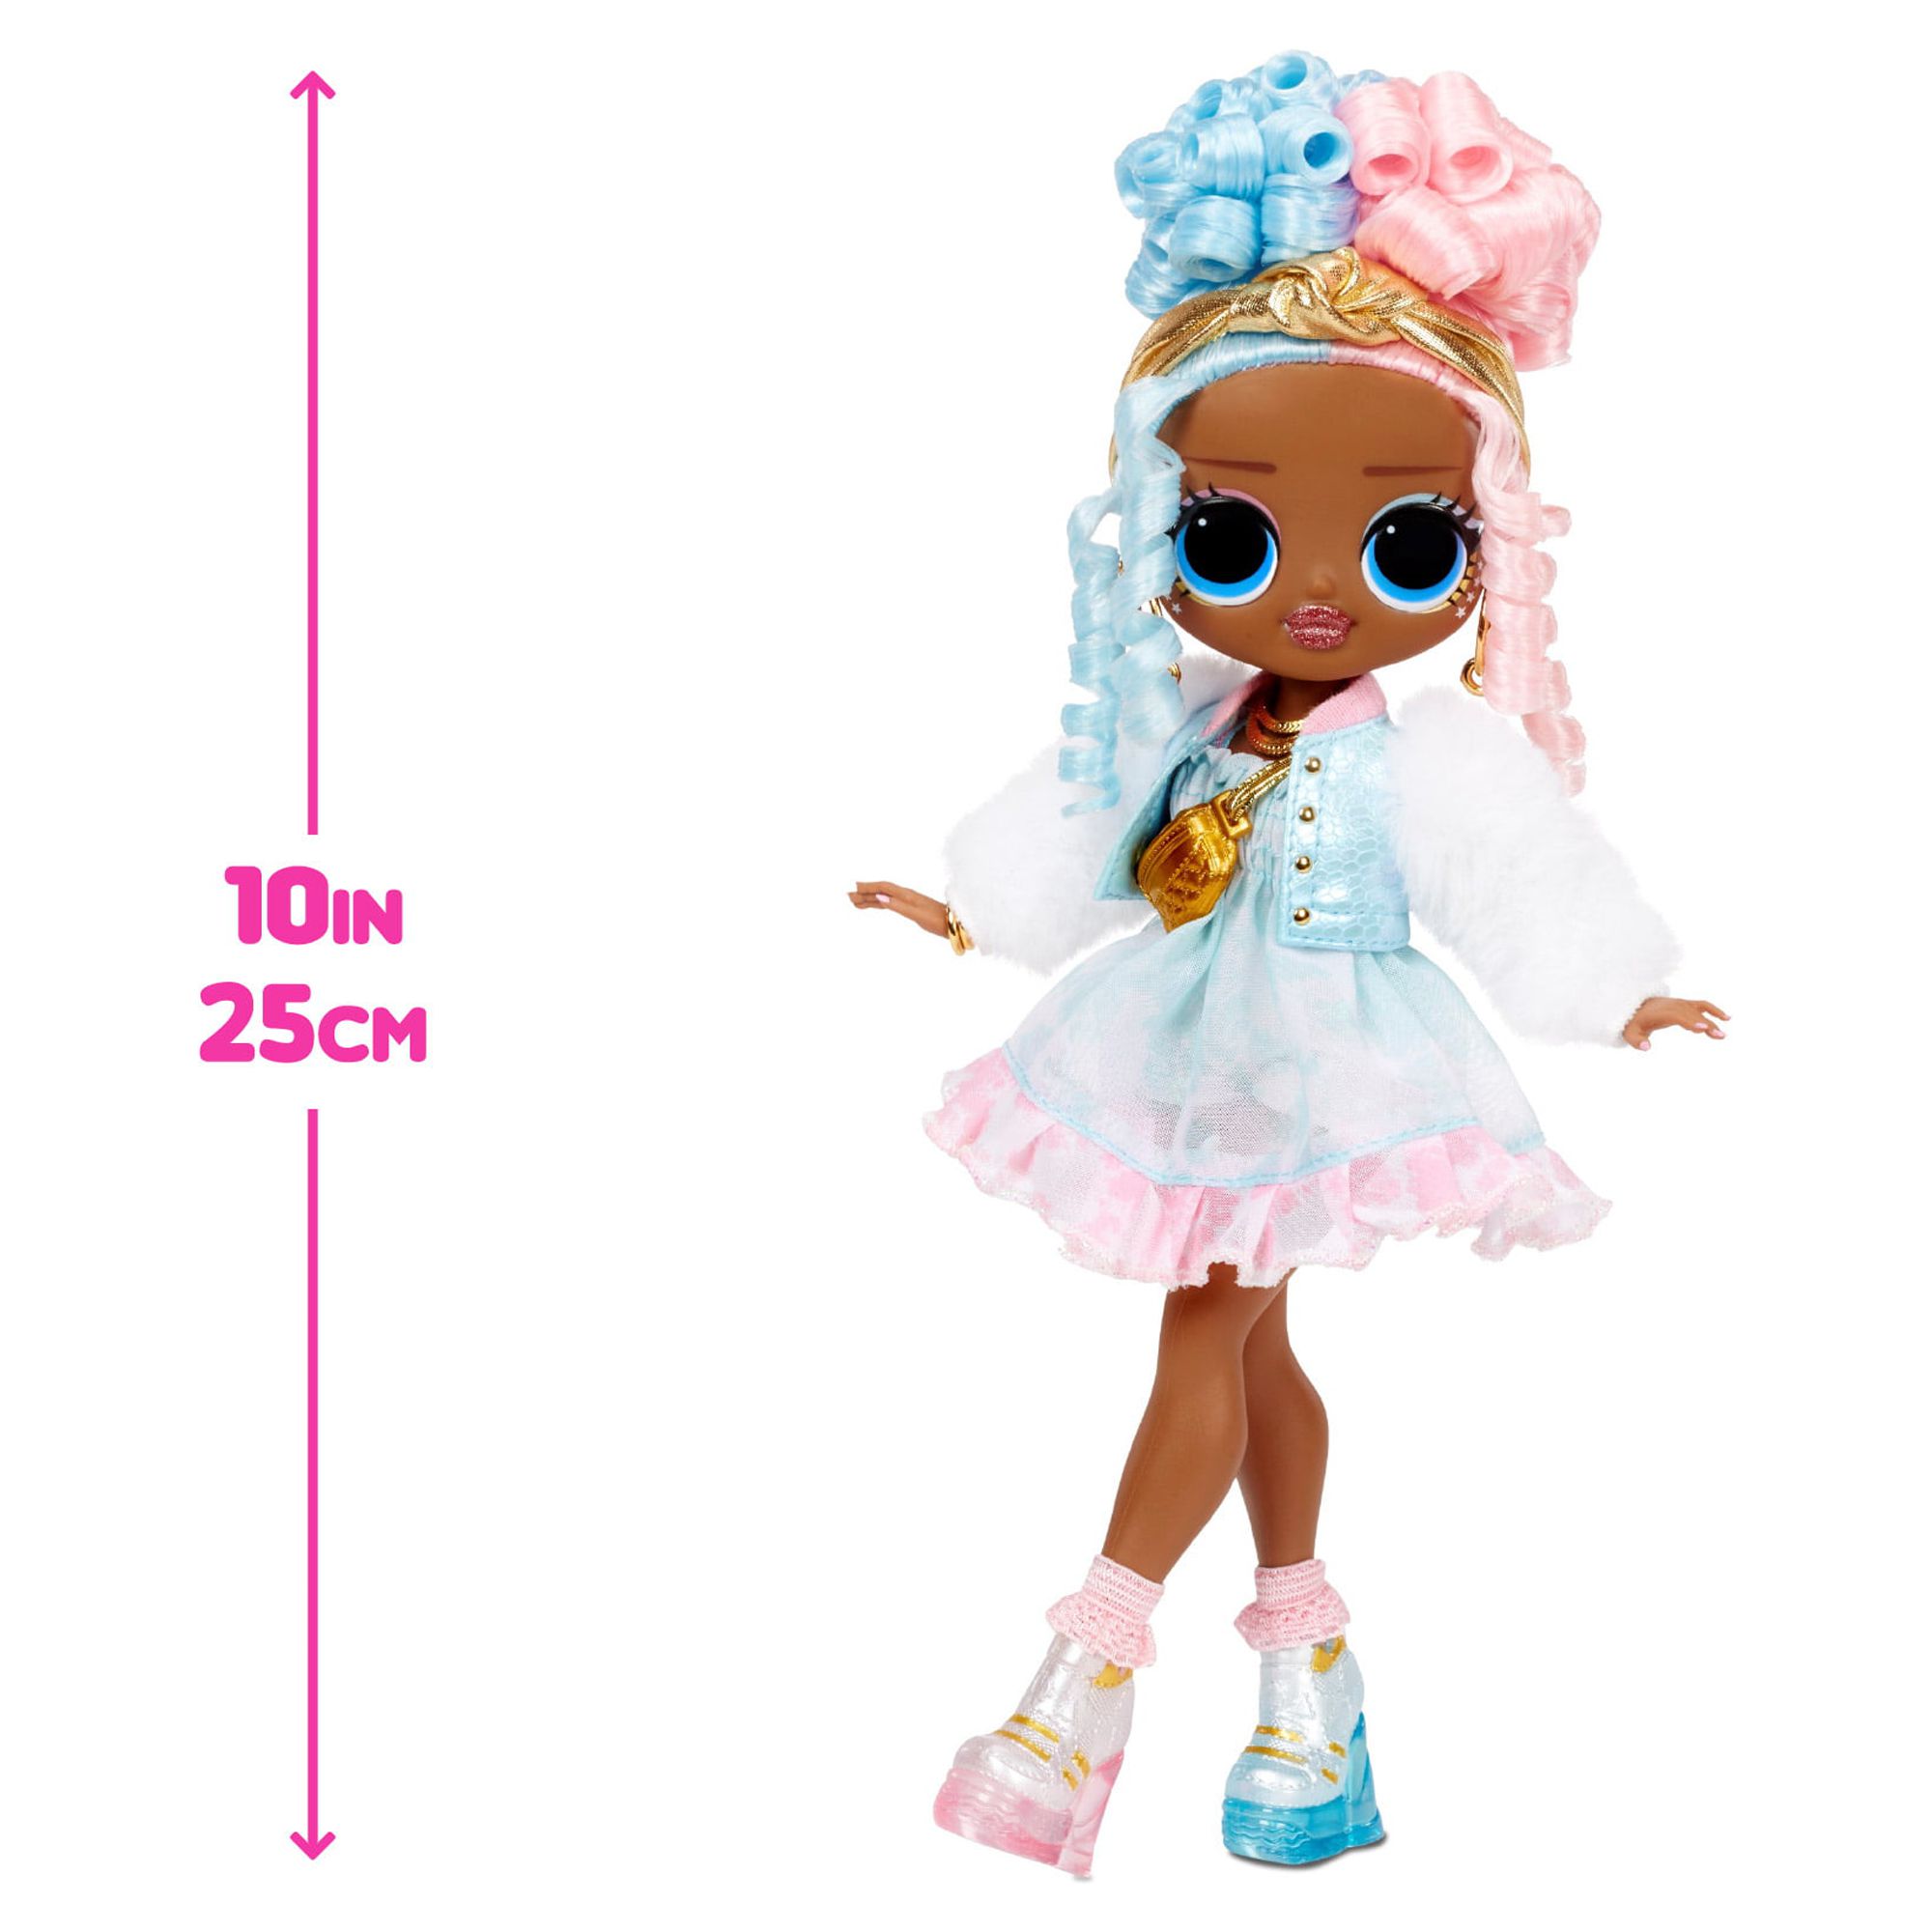 LOL Surprise OMG Sweets Fashion Doll - Dress Up Doll Set with 20 Surprises for Girls and Kids 4+ - image 7 of 8